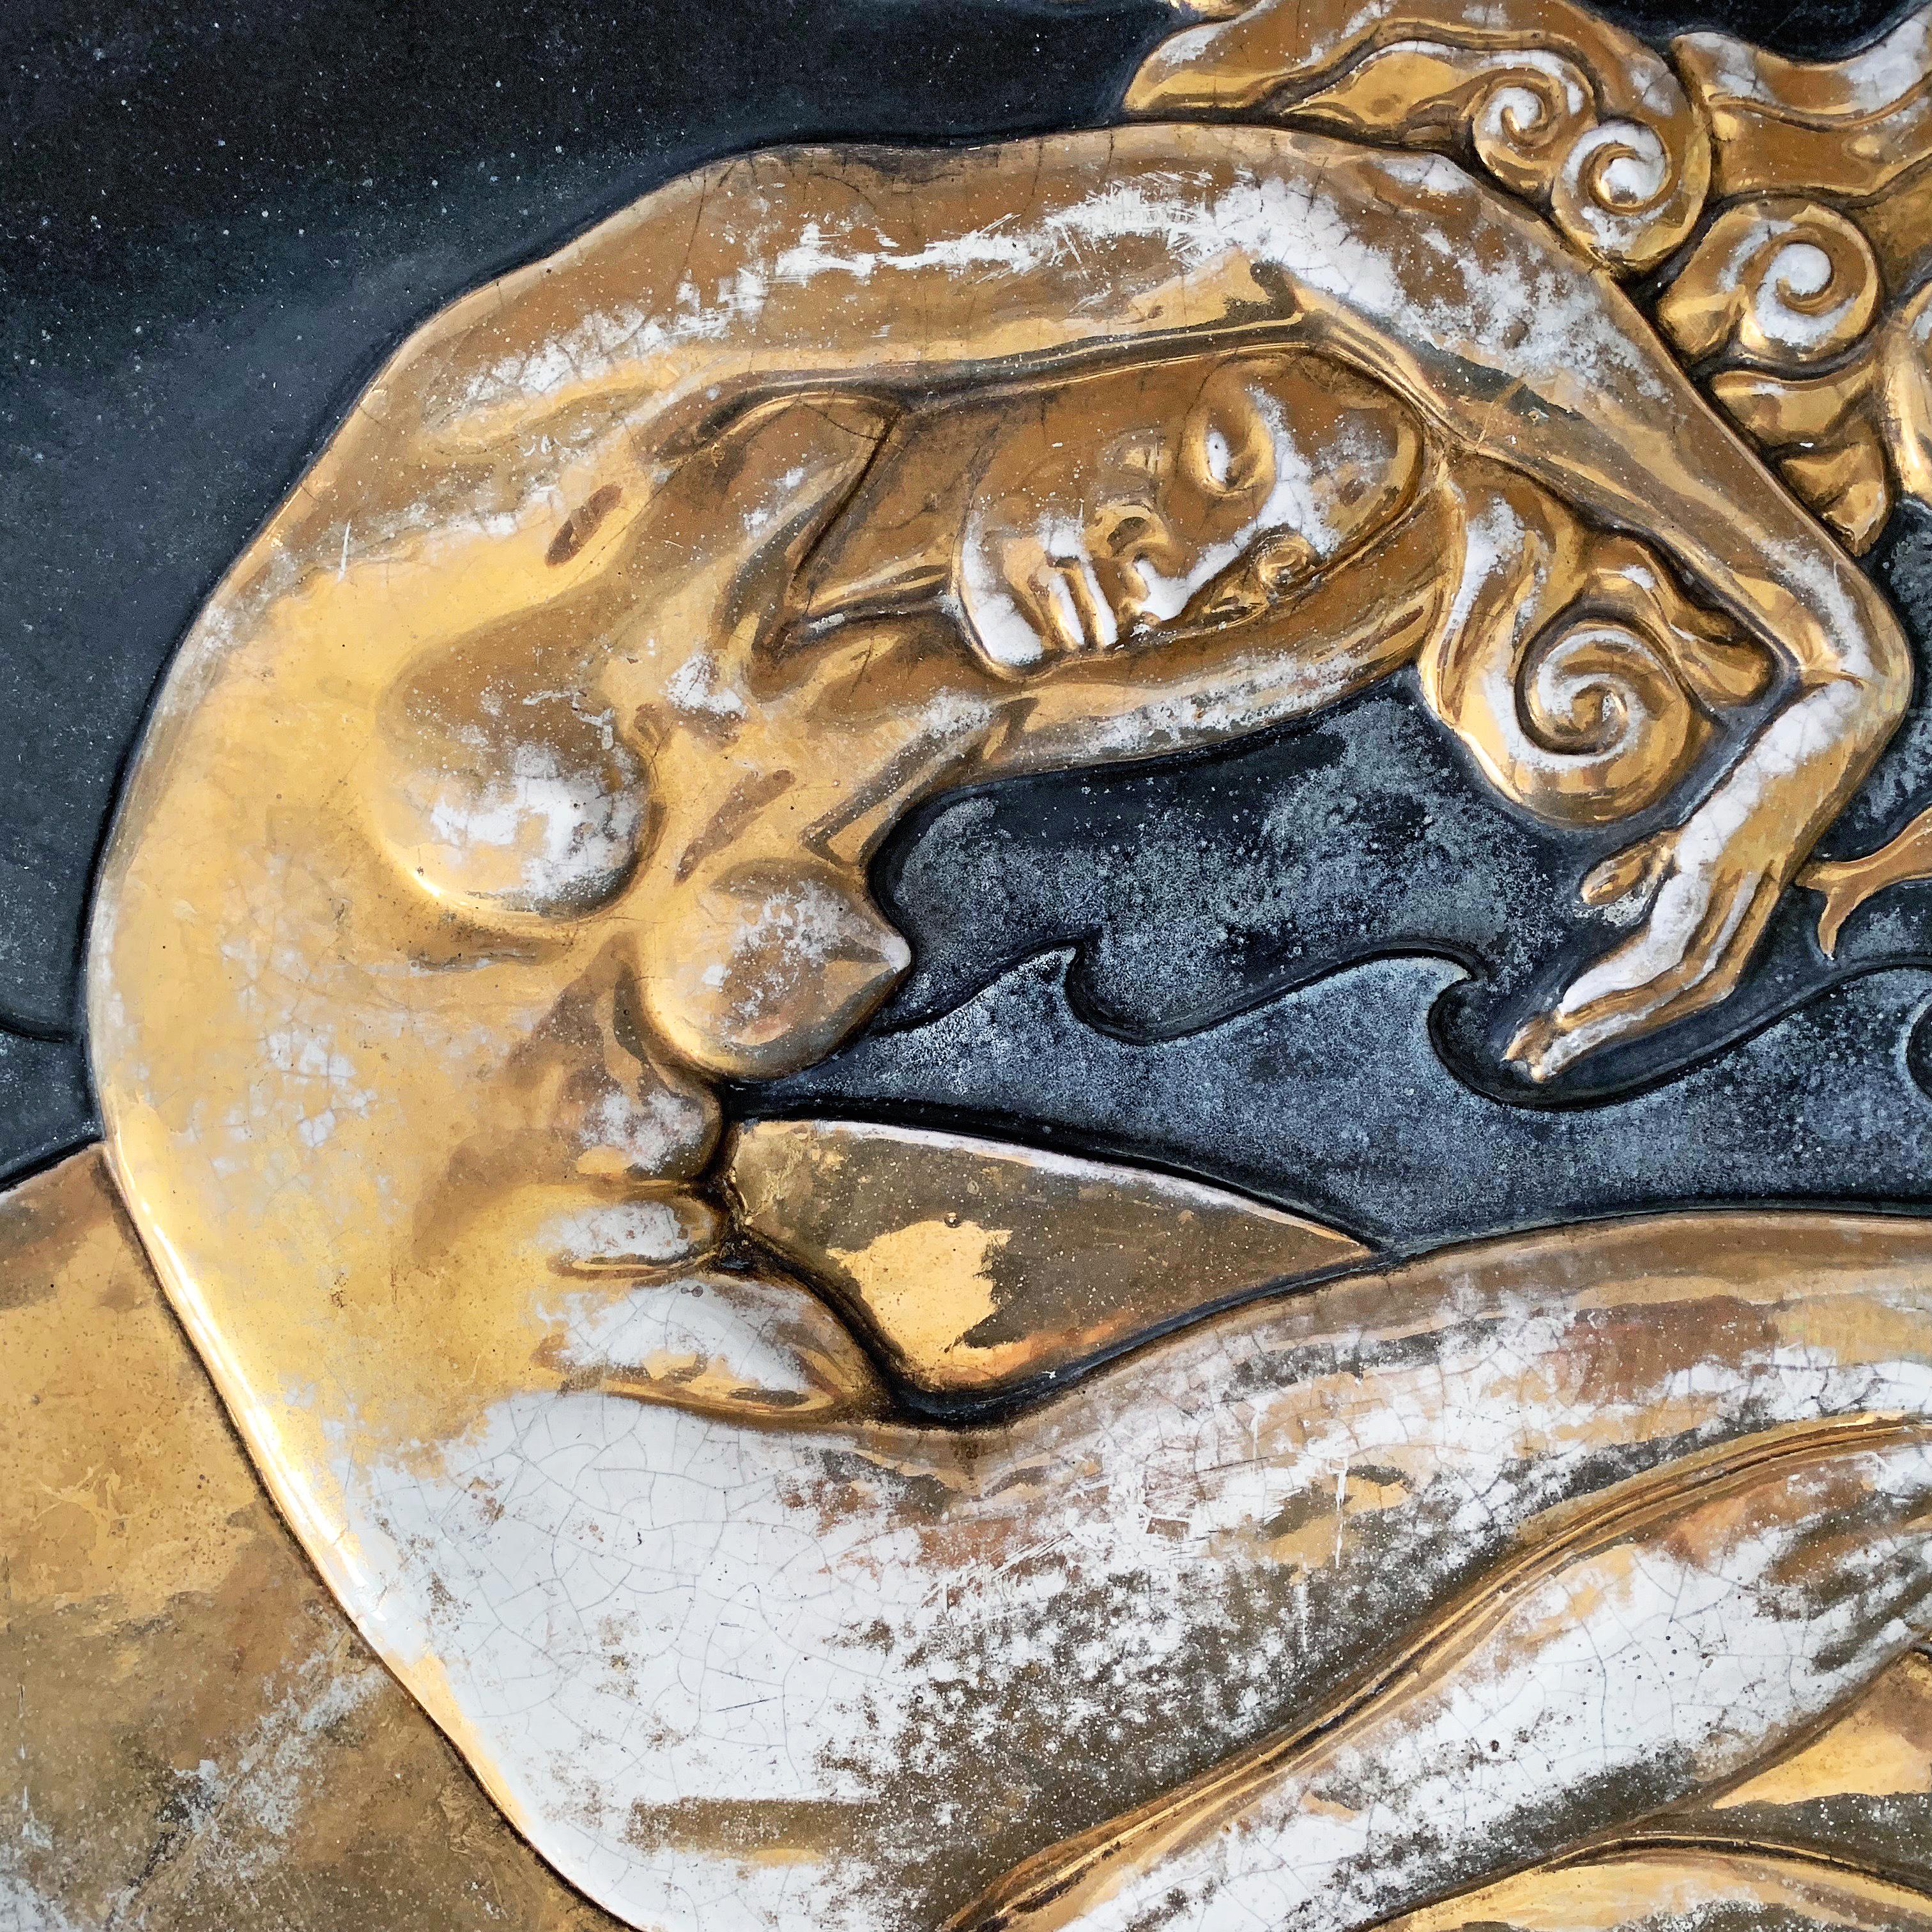 Spectacular in conception and execution, this large bas relief panel in glazed terra cotta depicts a nude mermaid in the foreground, with Art Deco waves and a dolphin in the distance, all finished in gold lustre and deep black glazes. The panel was